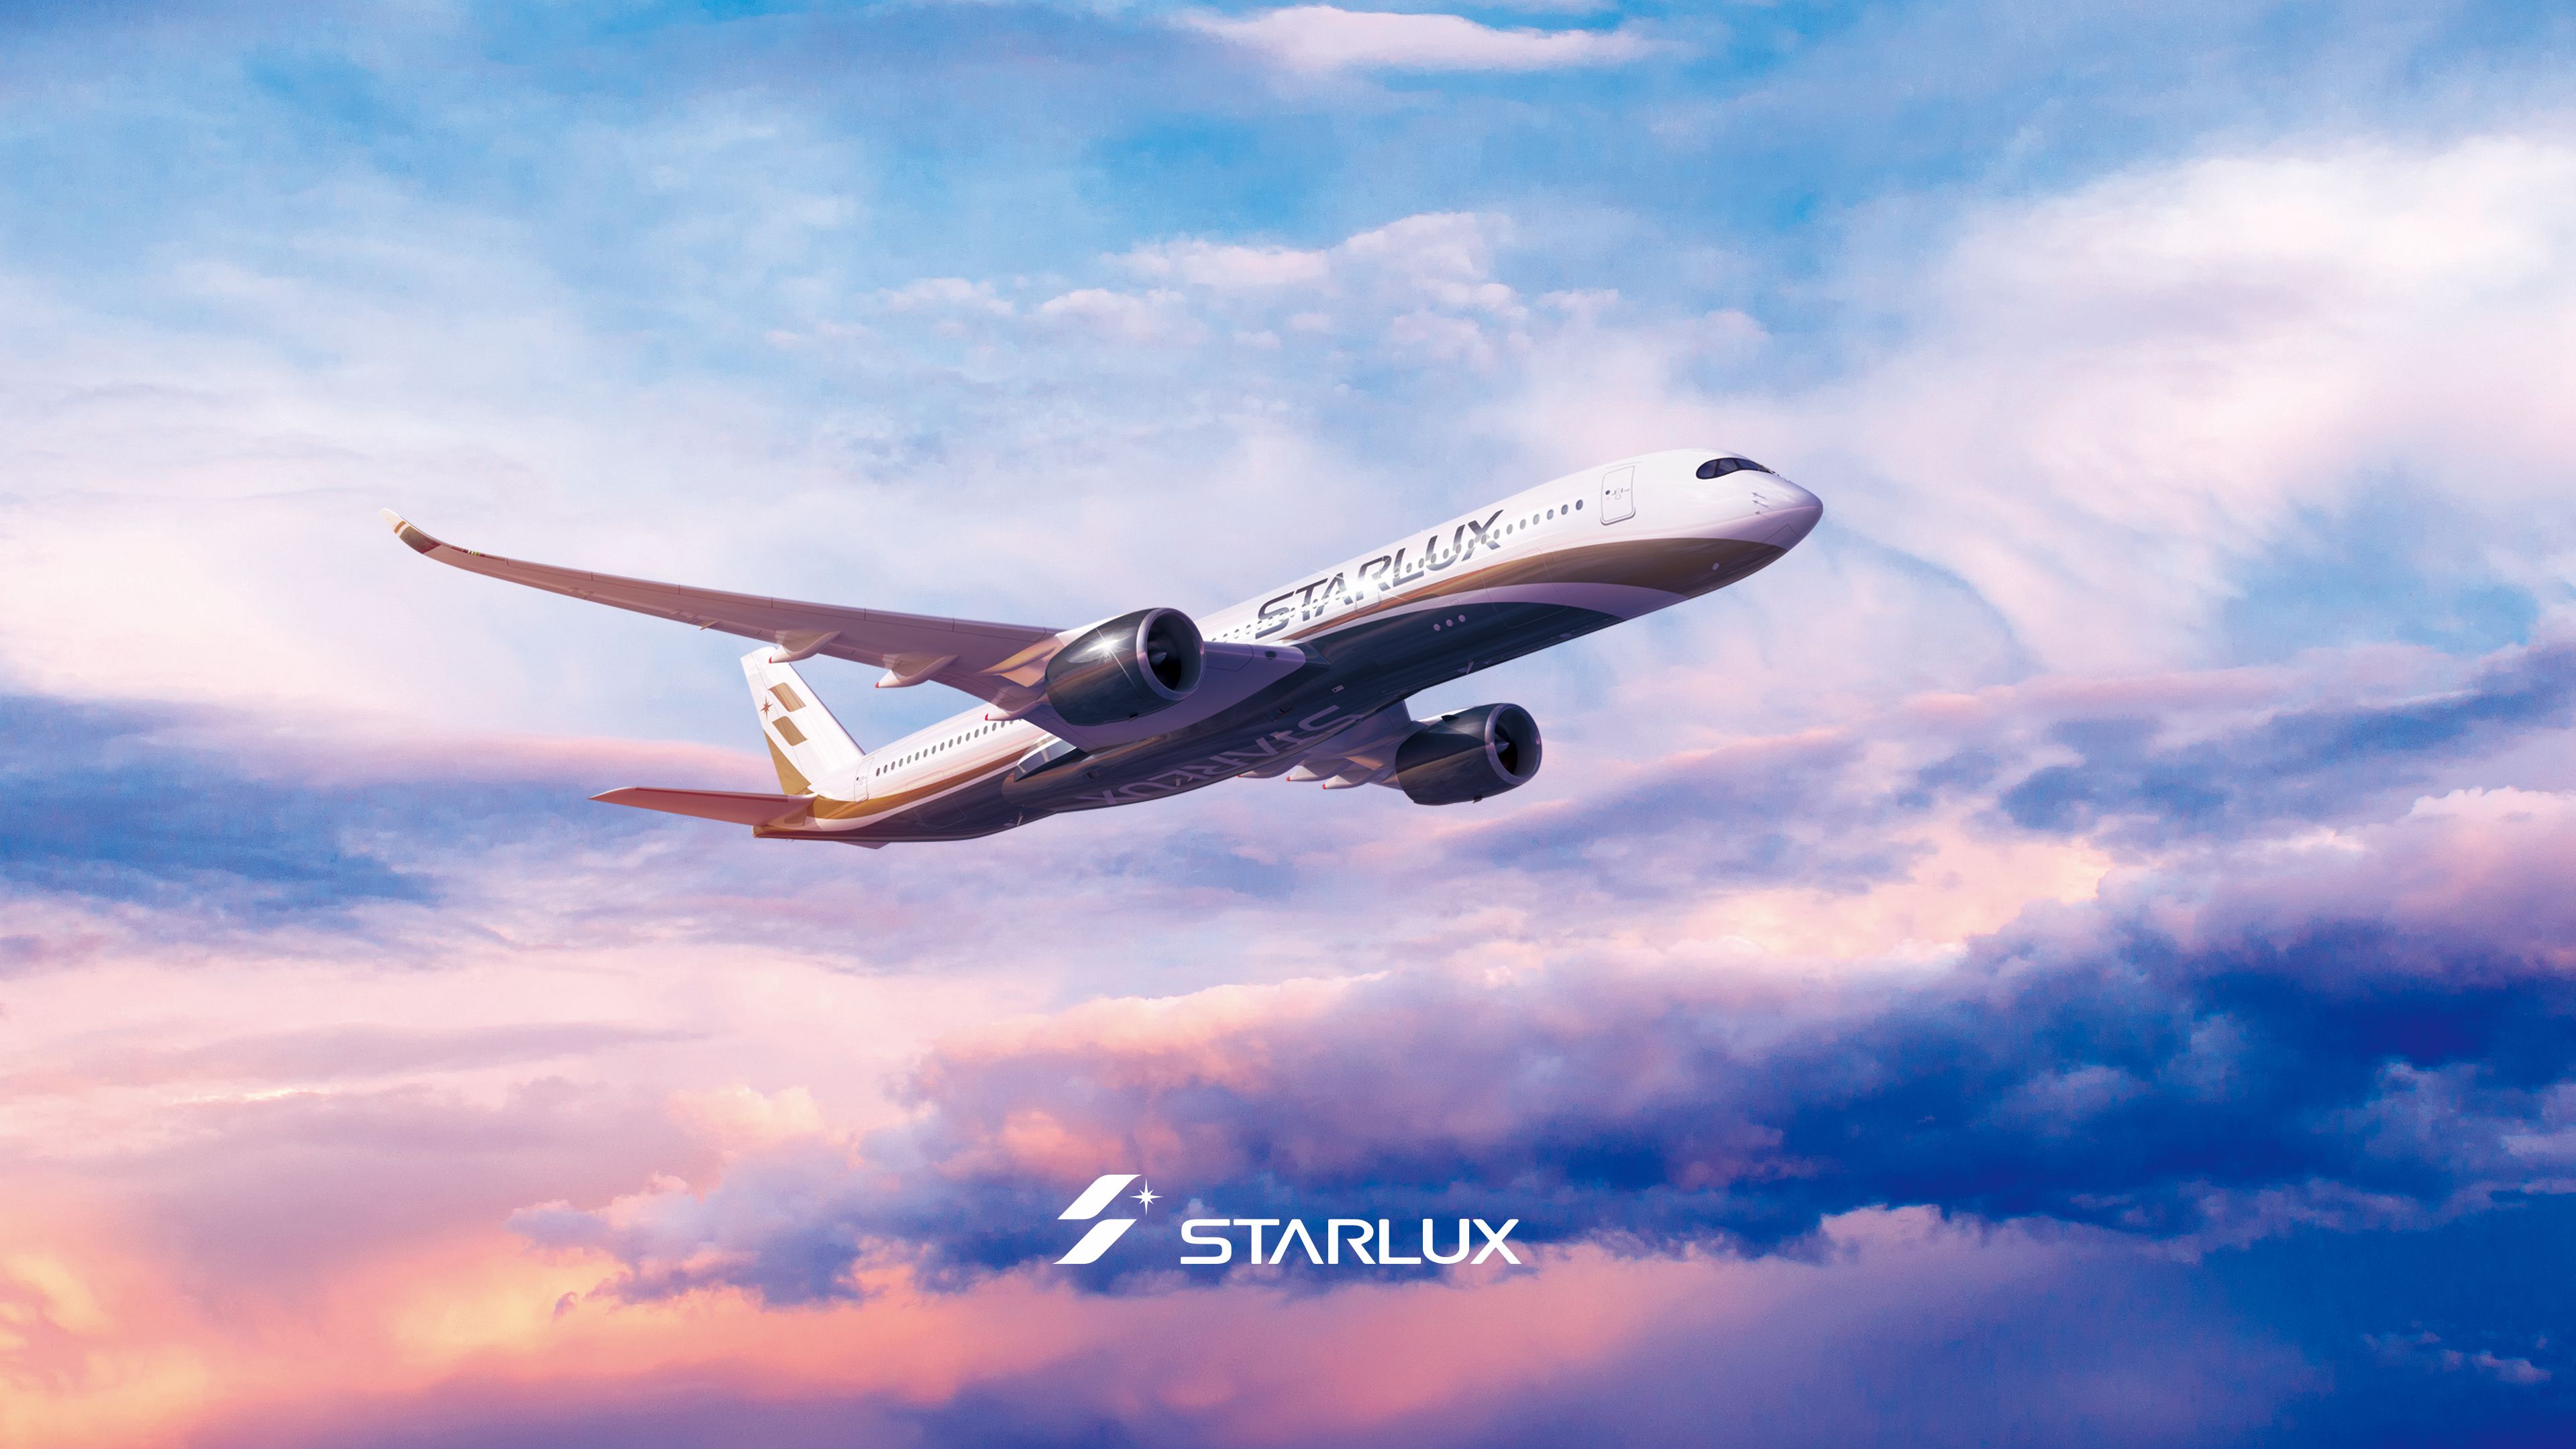 Starlux Airlines will use its Airbus A350 planes for its upcoming route from Taipei, Taiwan to San Francisco International Airport.